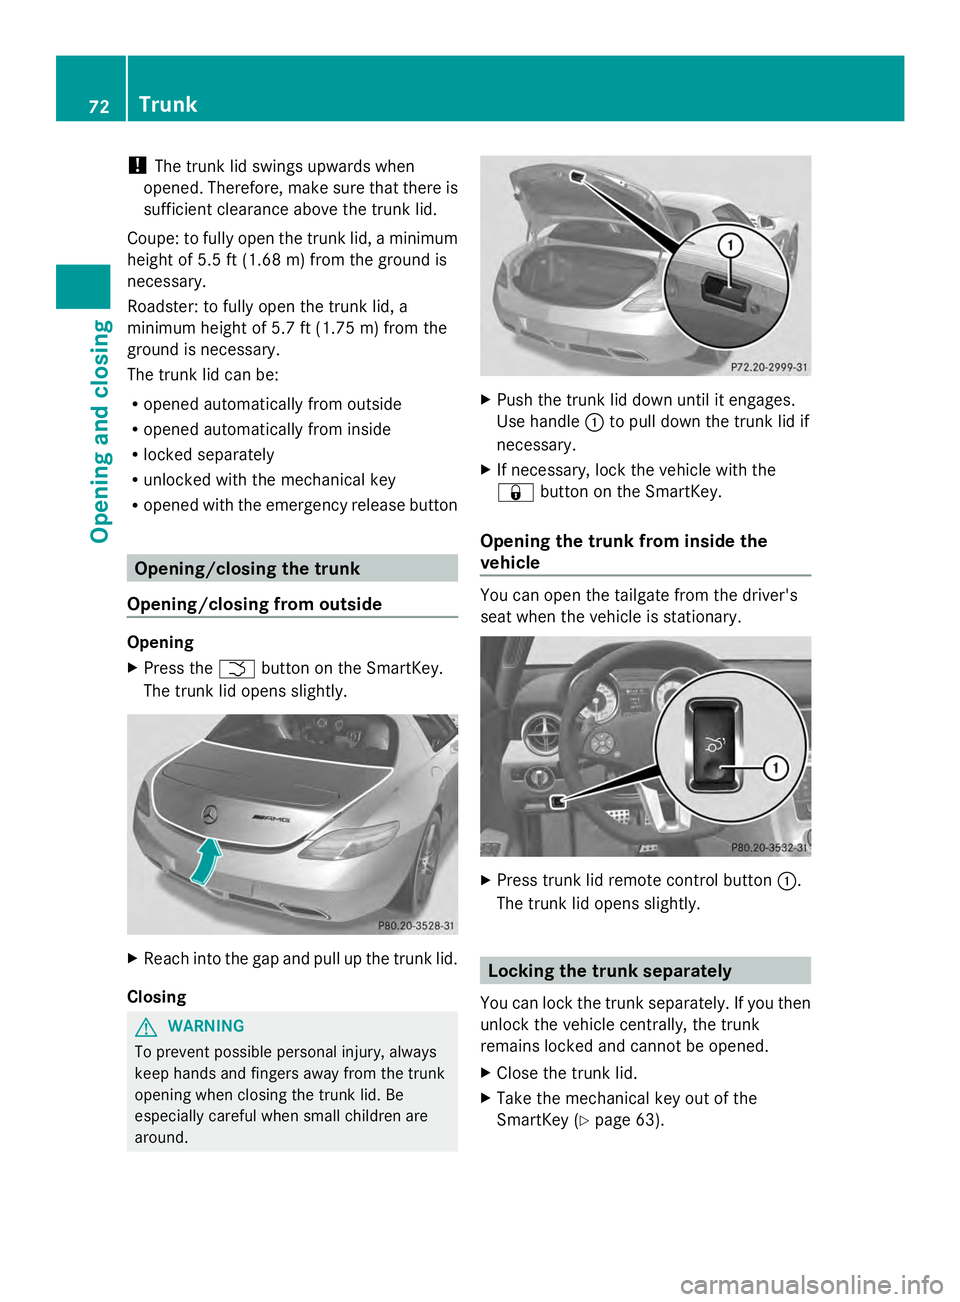 MERCEDES-BENZ SLS AMG 2013  Owners Manual !
The trunk lid swings upwards when
opened. Therefore, make sure that there is
sufficient clearance above the trunk lid.
Coupe: to fully open the trunk lid, a minimum
height of 5.5 ft (1.68 m) from th